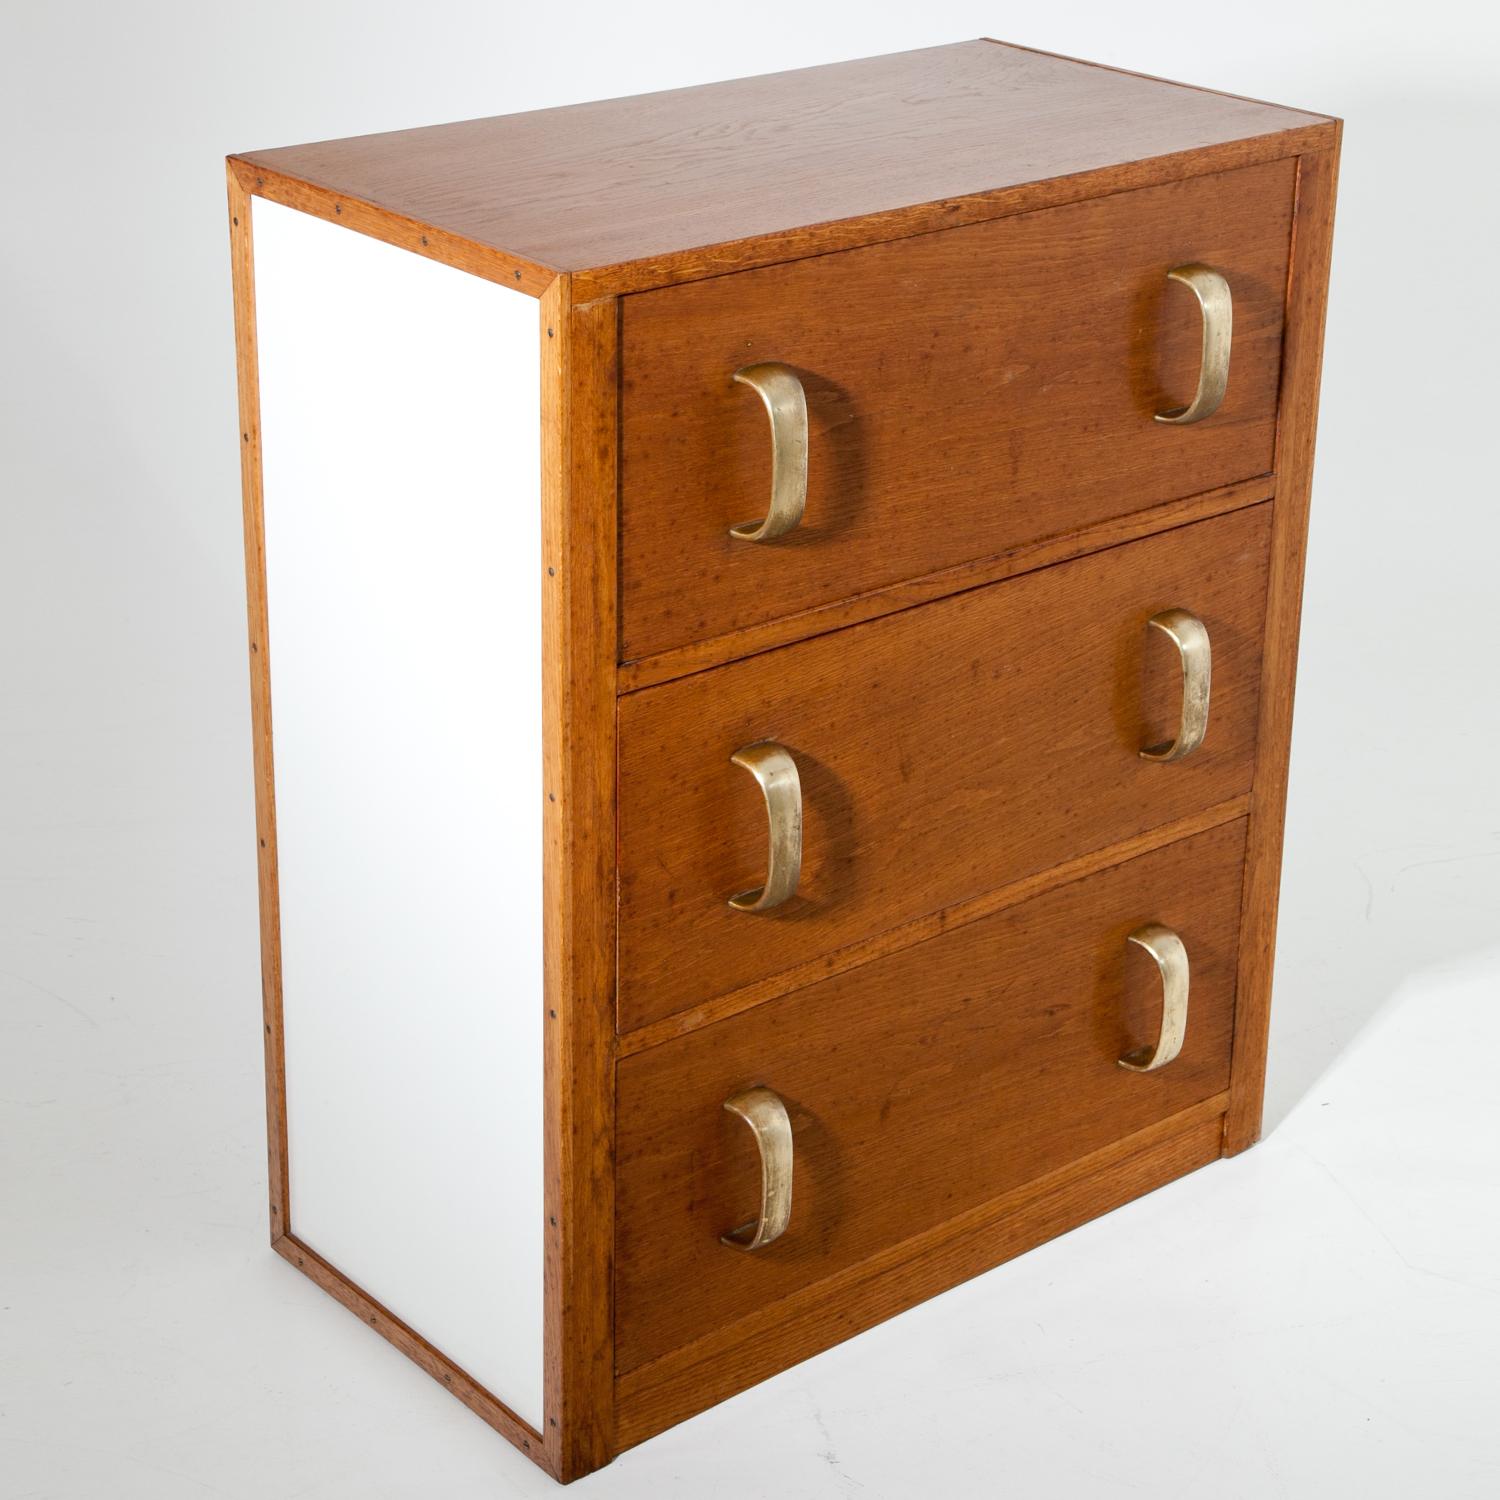 Art Deco chest of drawers with a straight body, white side panels as well as three drawers with smooth brass handles. Viennese manufacturer Herrgesell created similar chests with vertical handles, see MAK Wien, Inv. No. KI 15765-3064-74 and KI